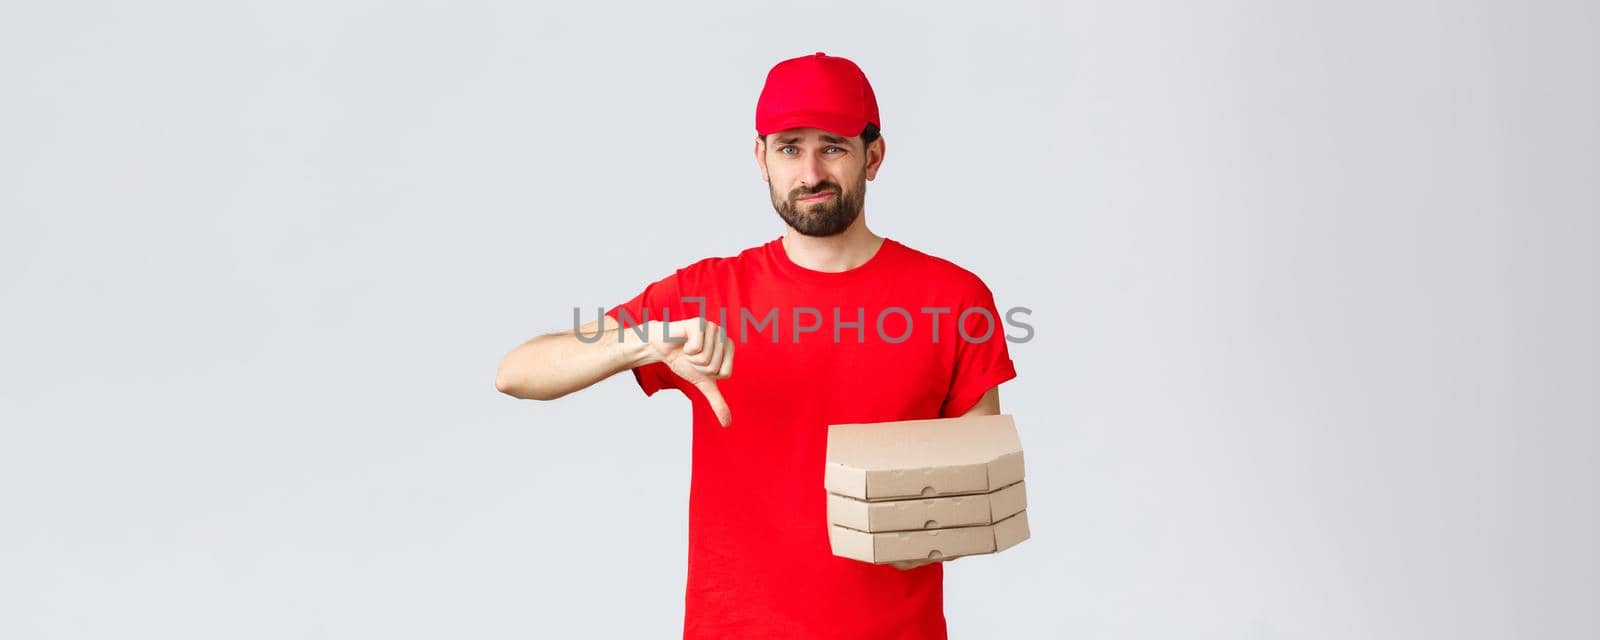 Food delivery, quarantine, stay home and order online concept. Disappointed and reluctant courier in red uniform cap and t-shirt, dislike pooq quality fast-food, thumb-down, holding pizza.